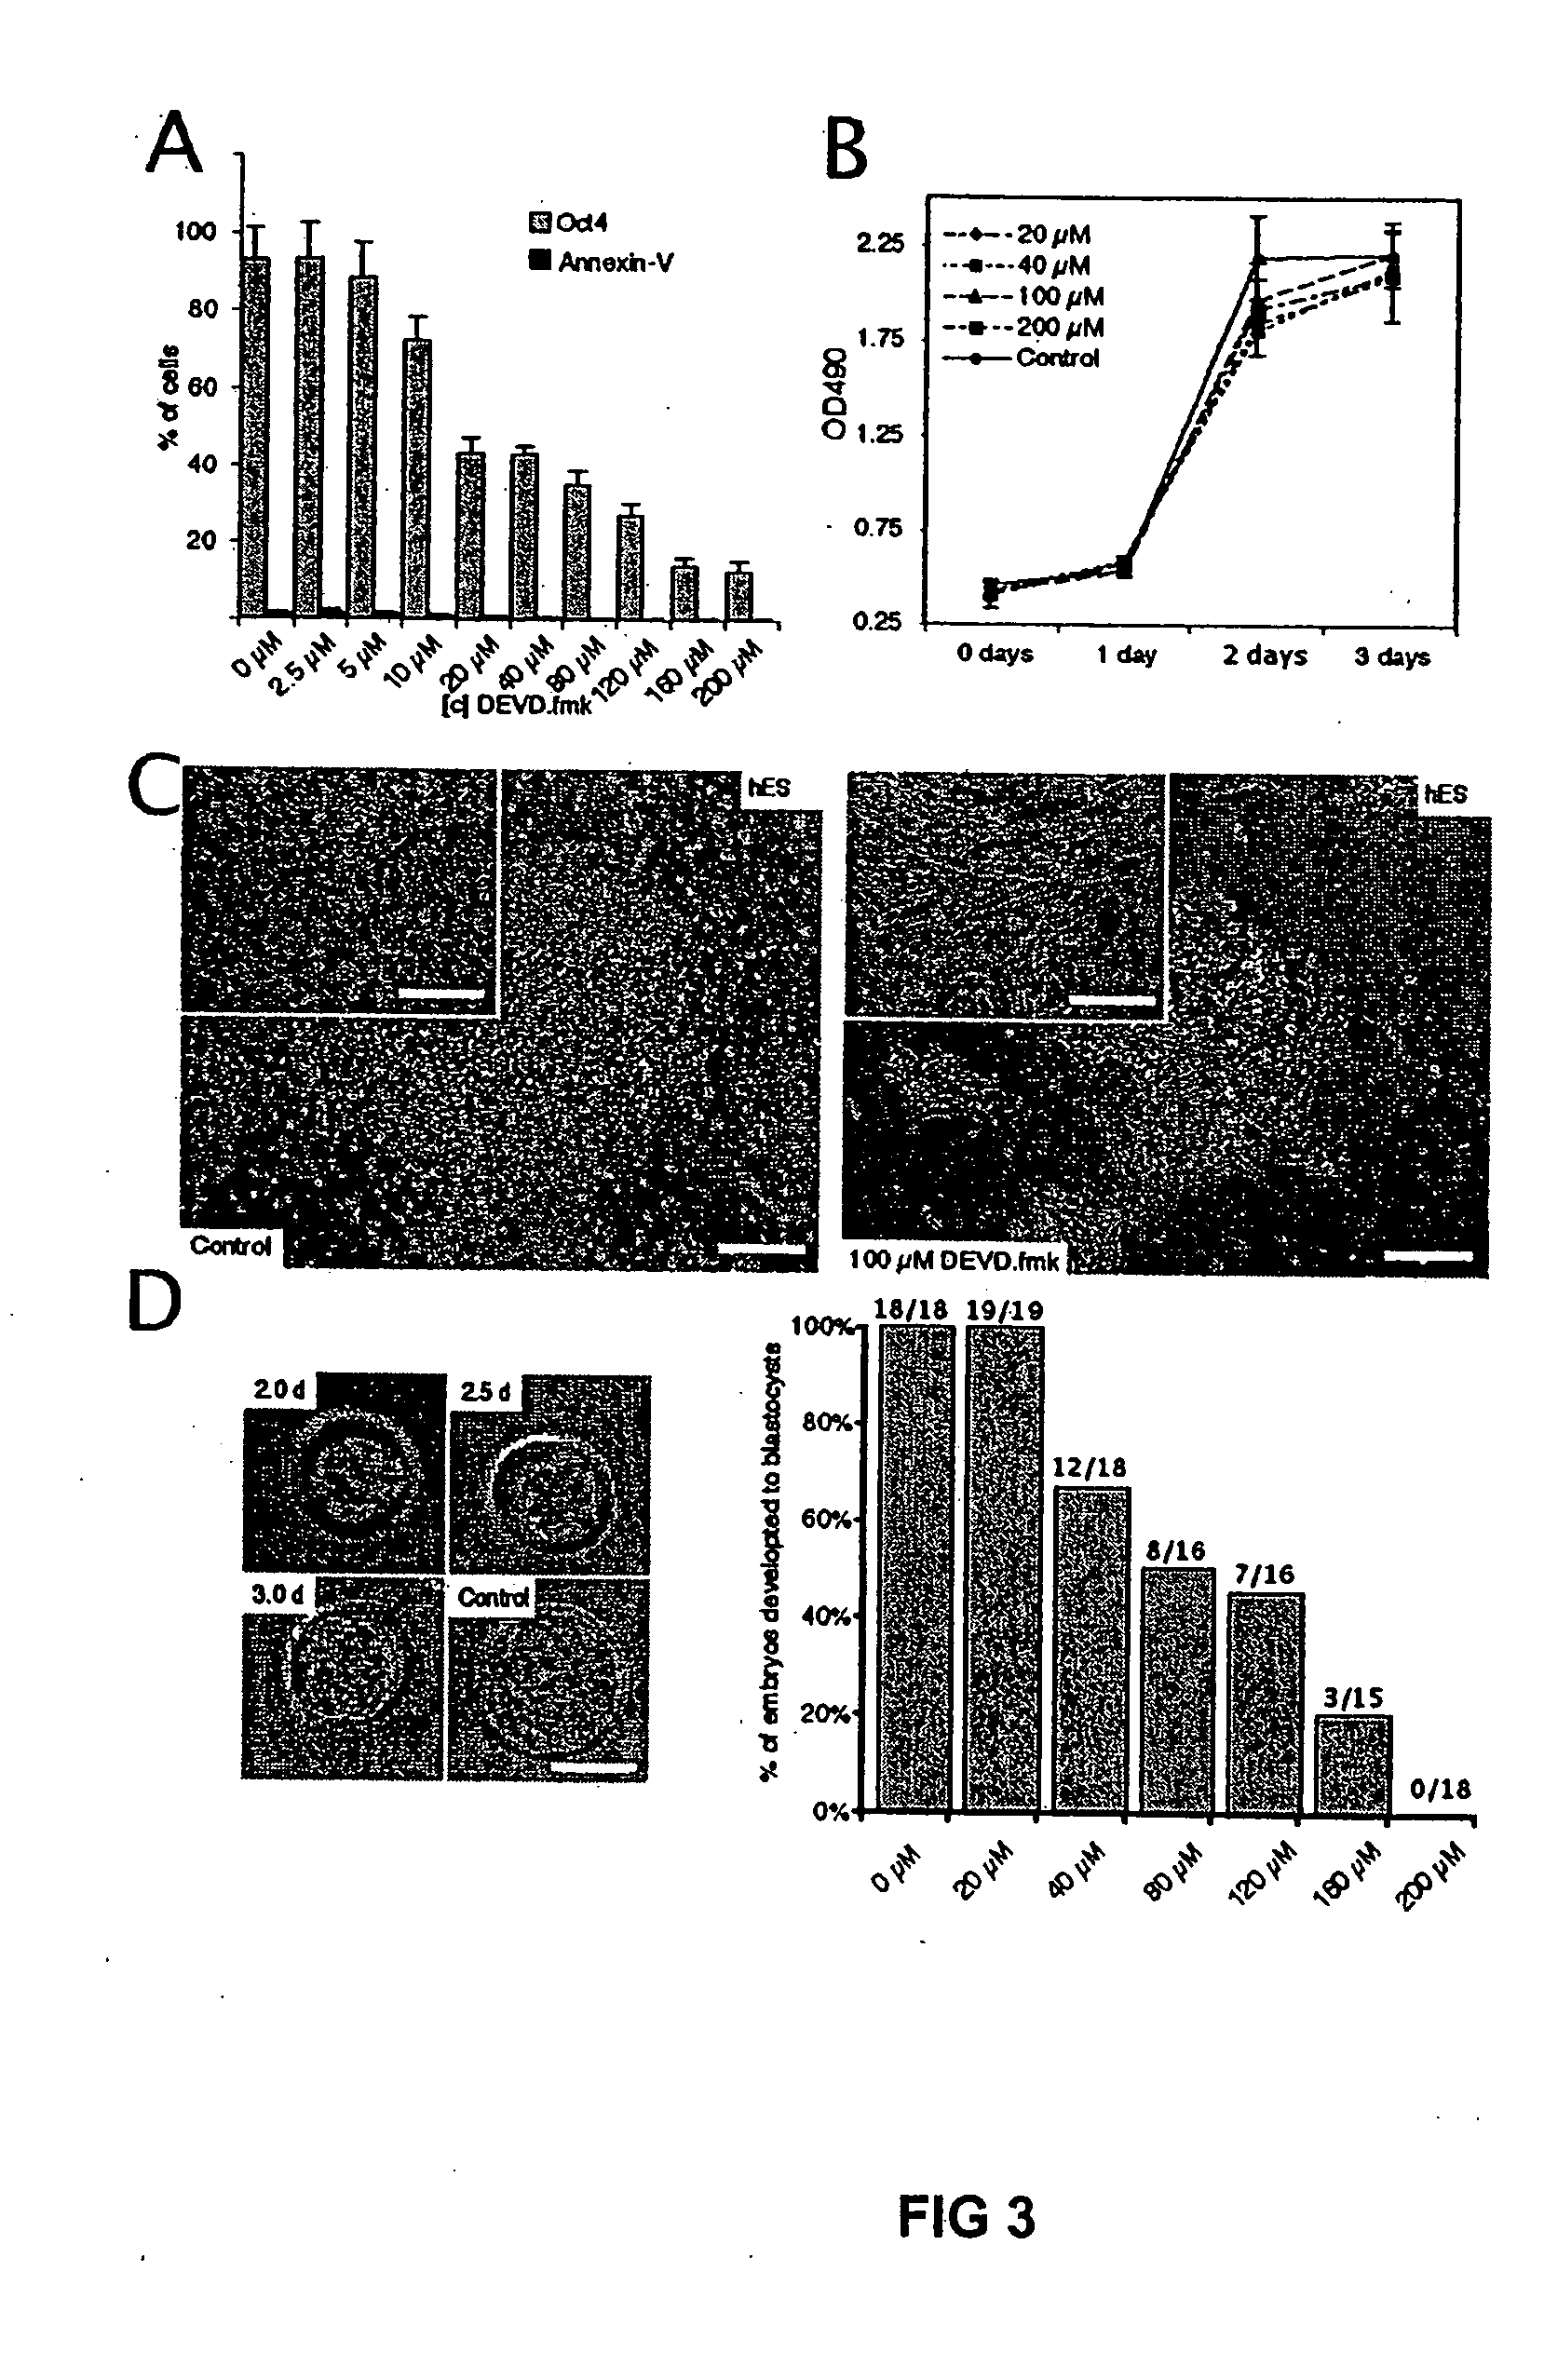 Differentiation of pluripotent embryonic stem cells